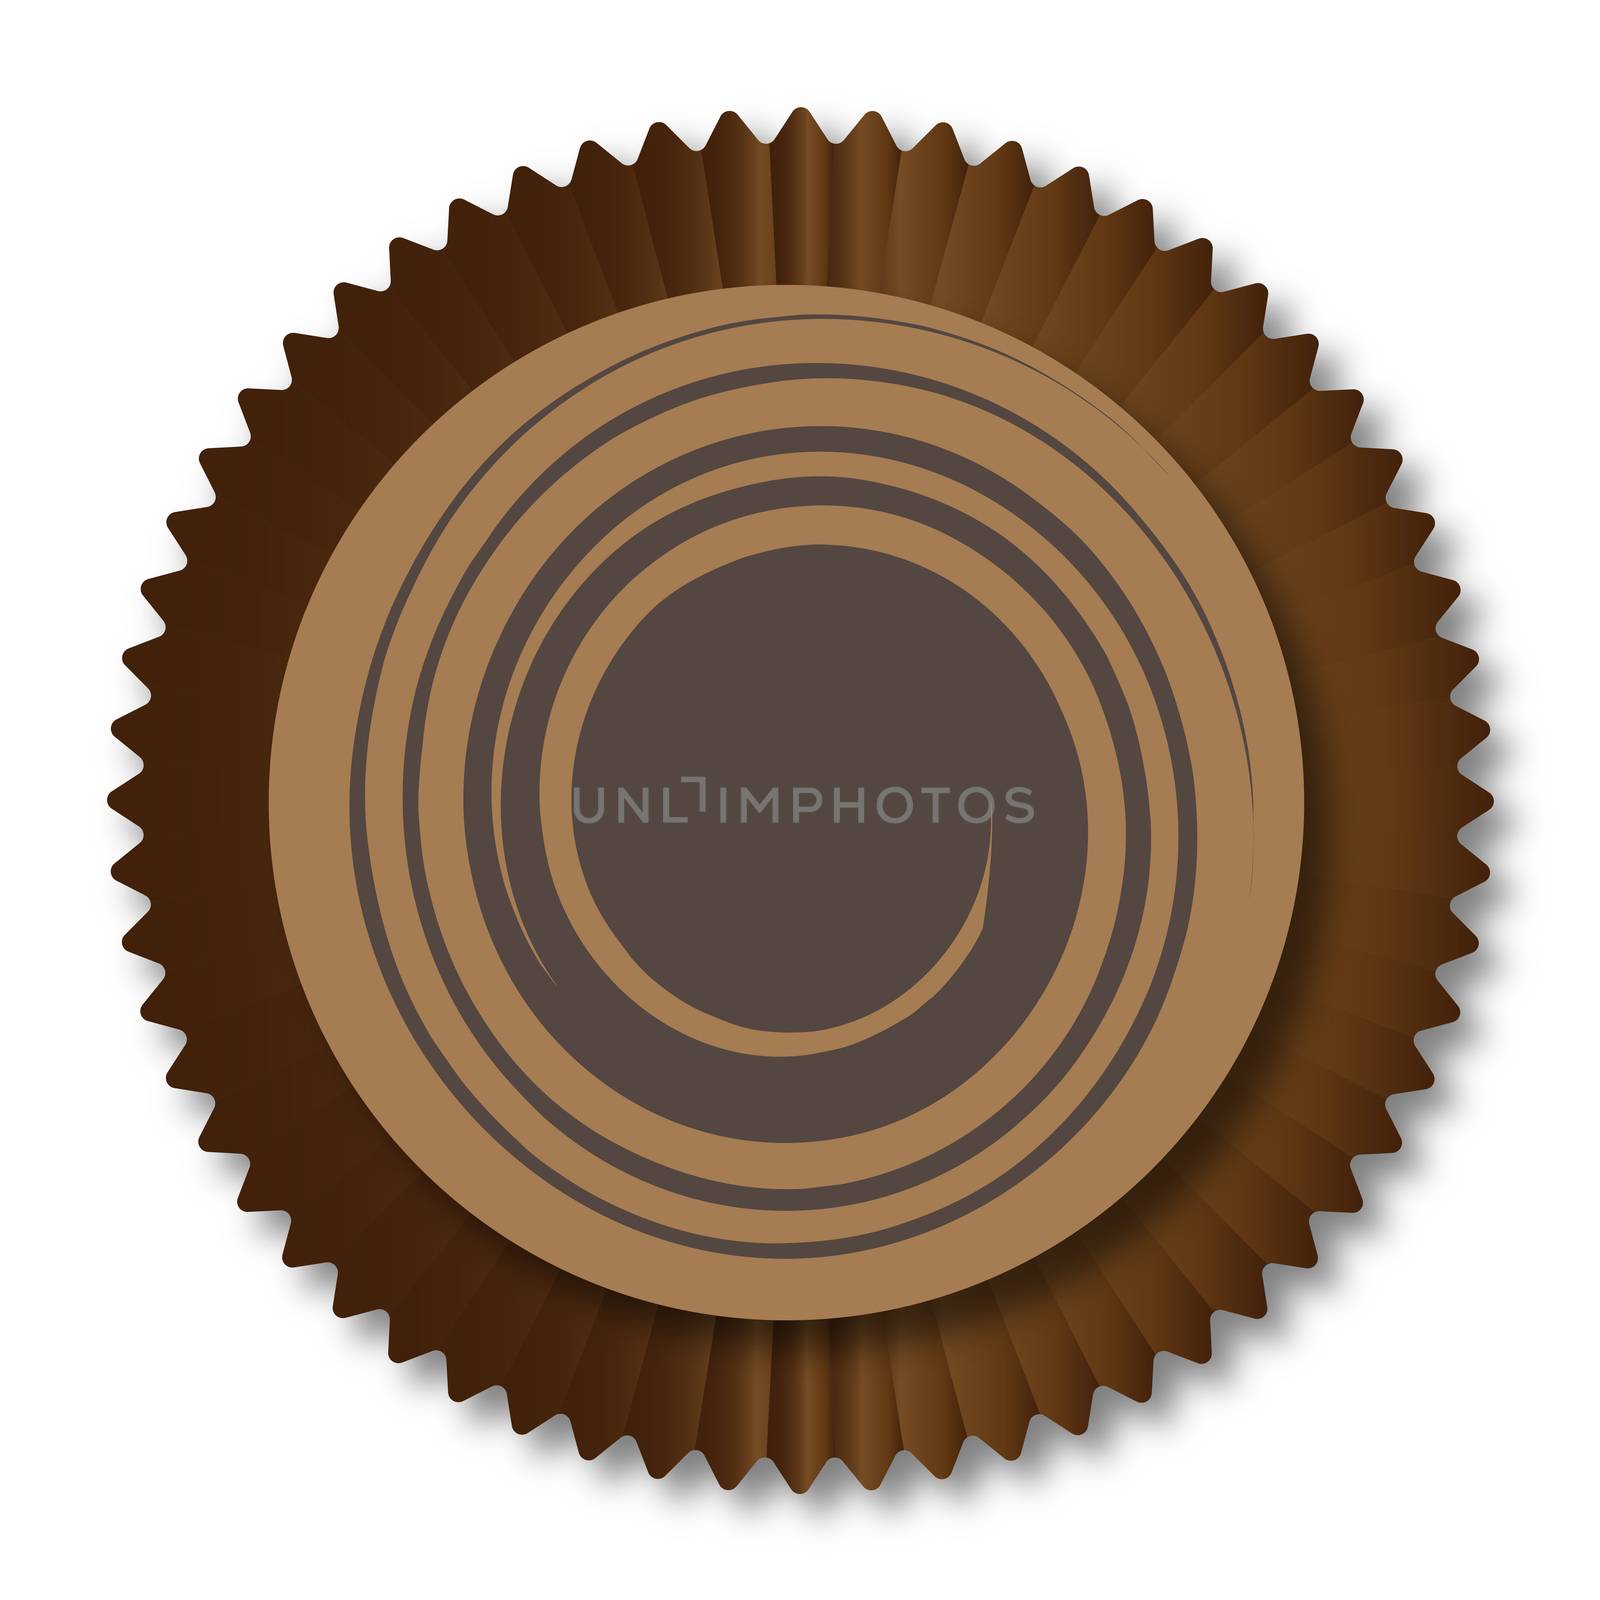 A typicswirl chocolate from a chocolate box selextion over a white background